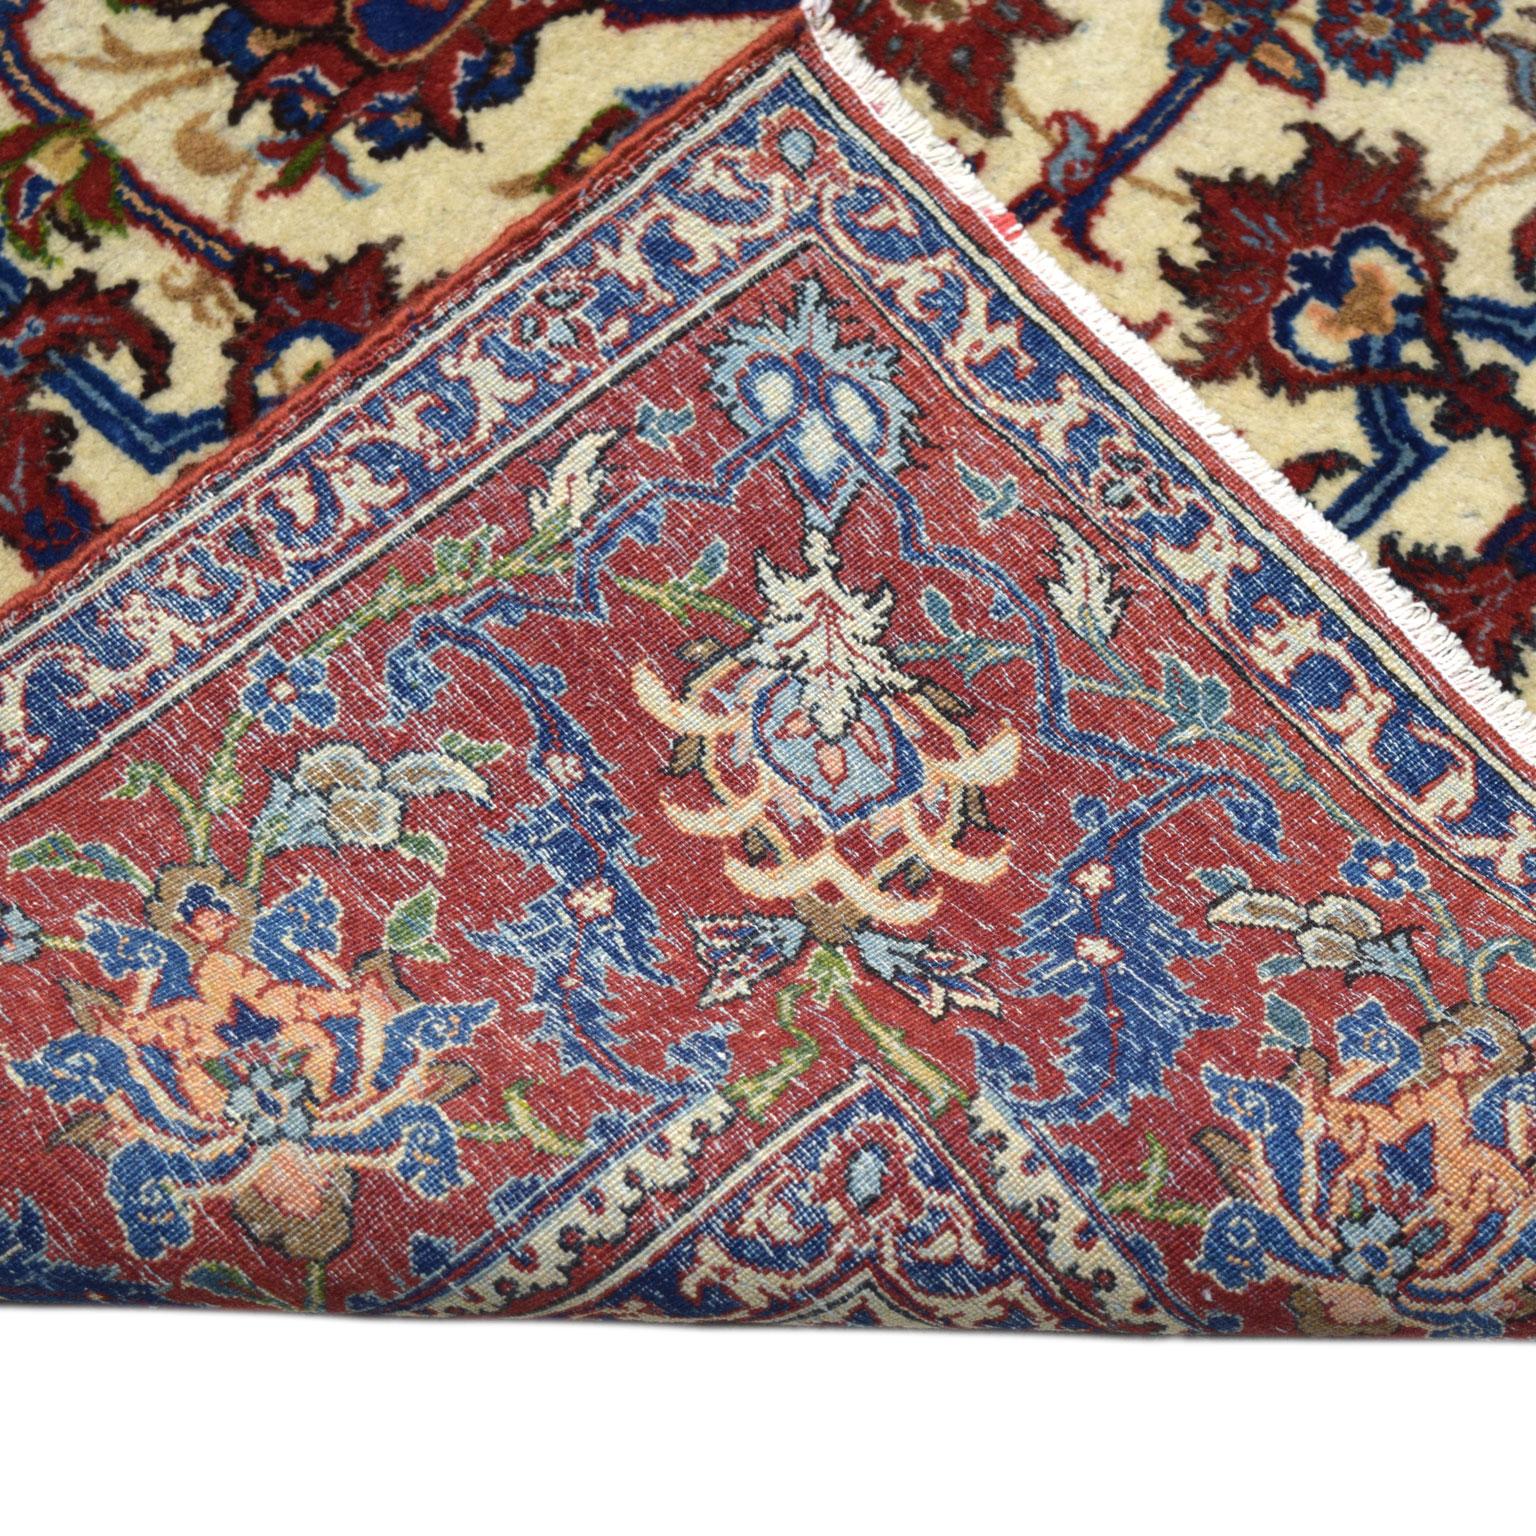 Antique 1900s Woo Persian Isfahan Rug, Red, Cream, and Gold, 5' x 7' For Sale 4